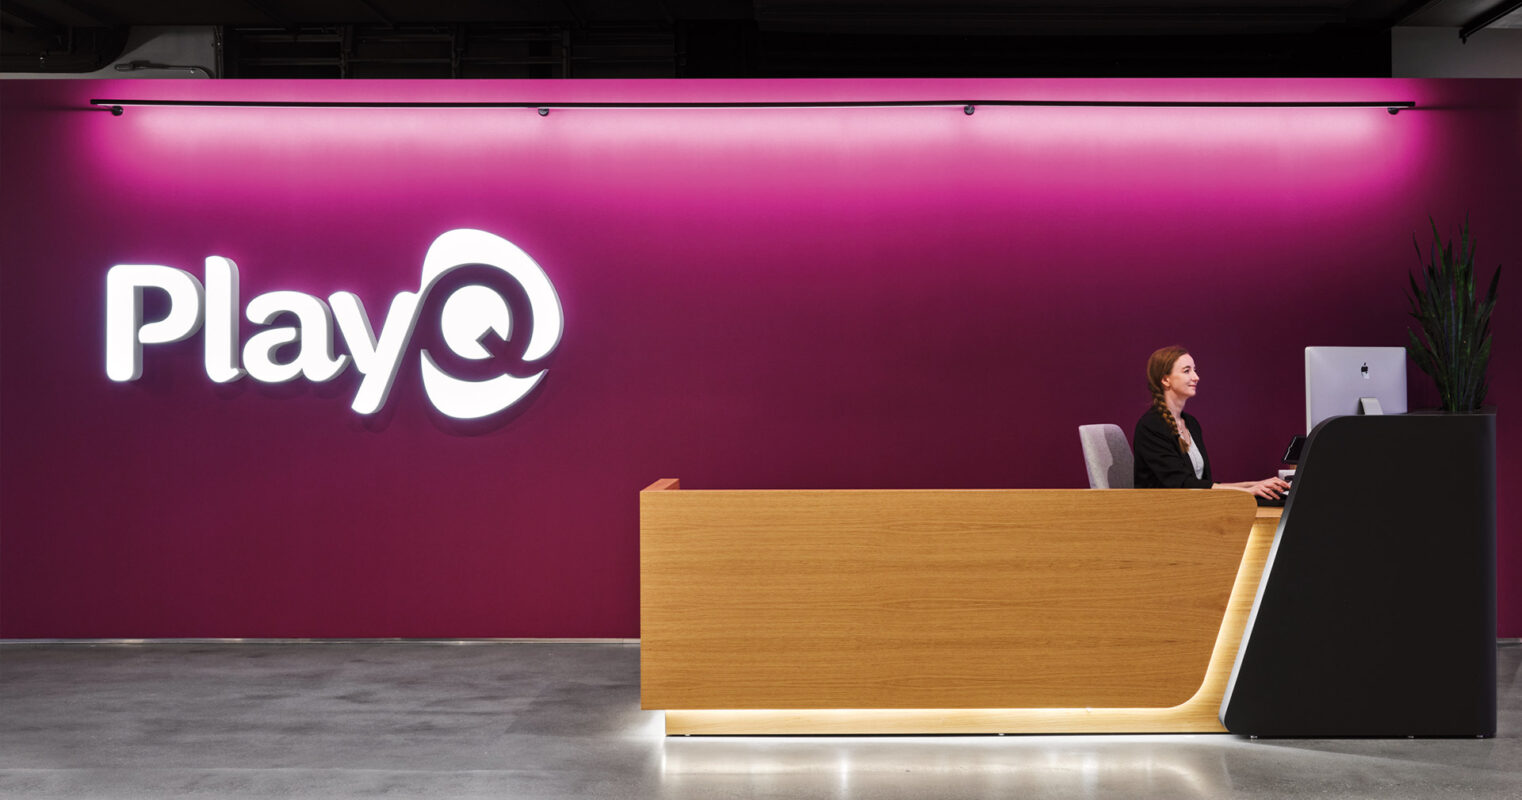 Reception desk with bright logo sign